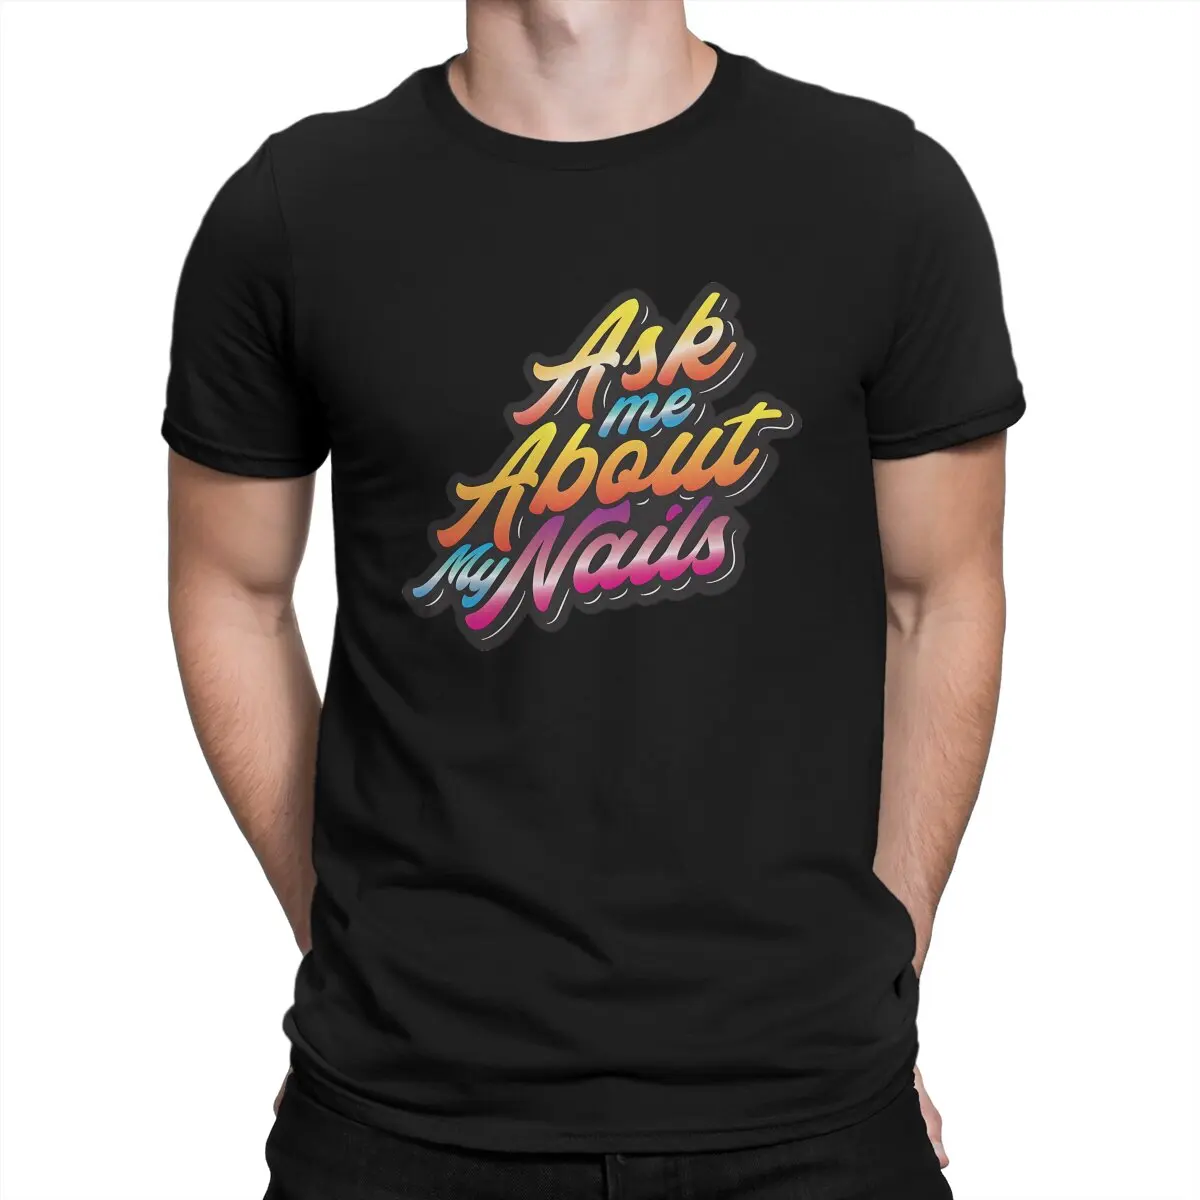 

Ask Me About My Nails T-Shirt Men Nail Polish Funny Cotton Tees Round Neck Short Sleeve T Shirts Summer Clothes